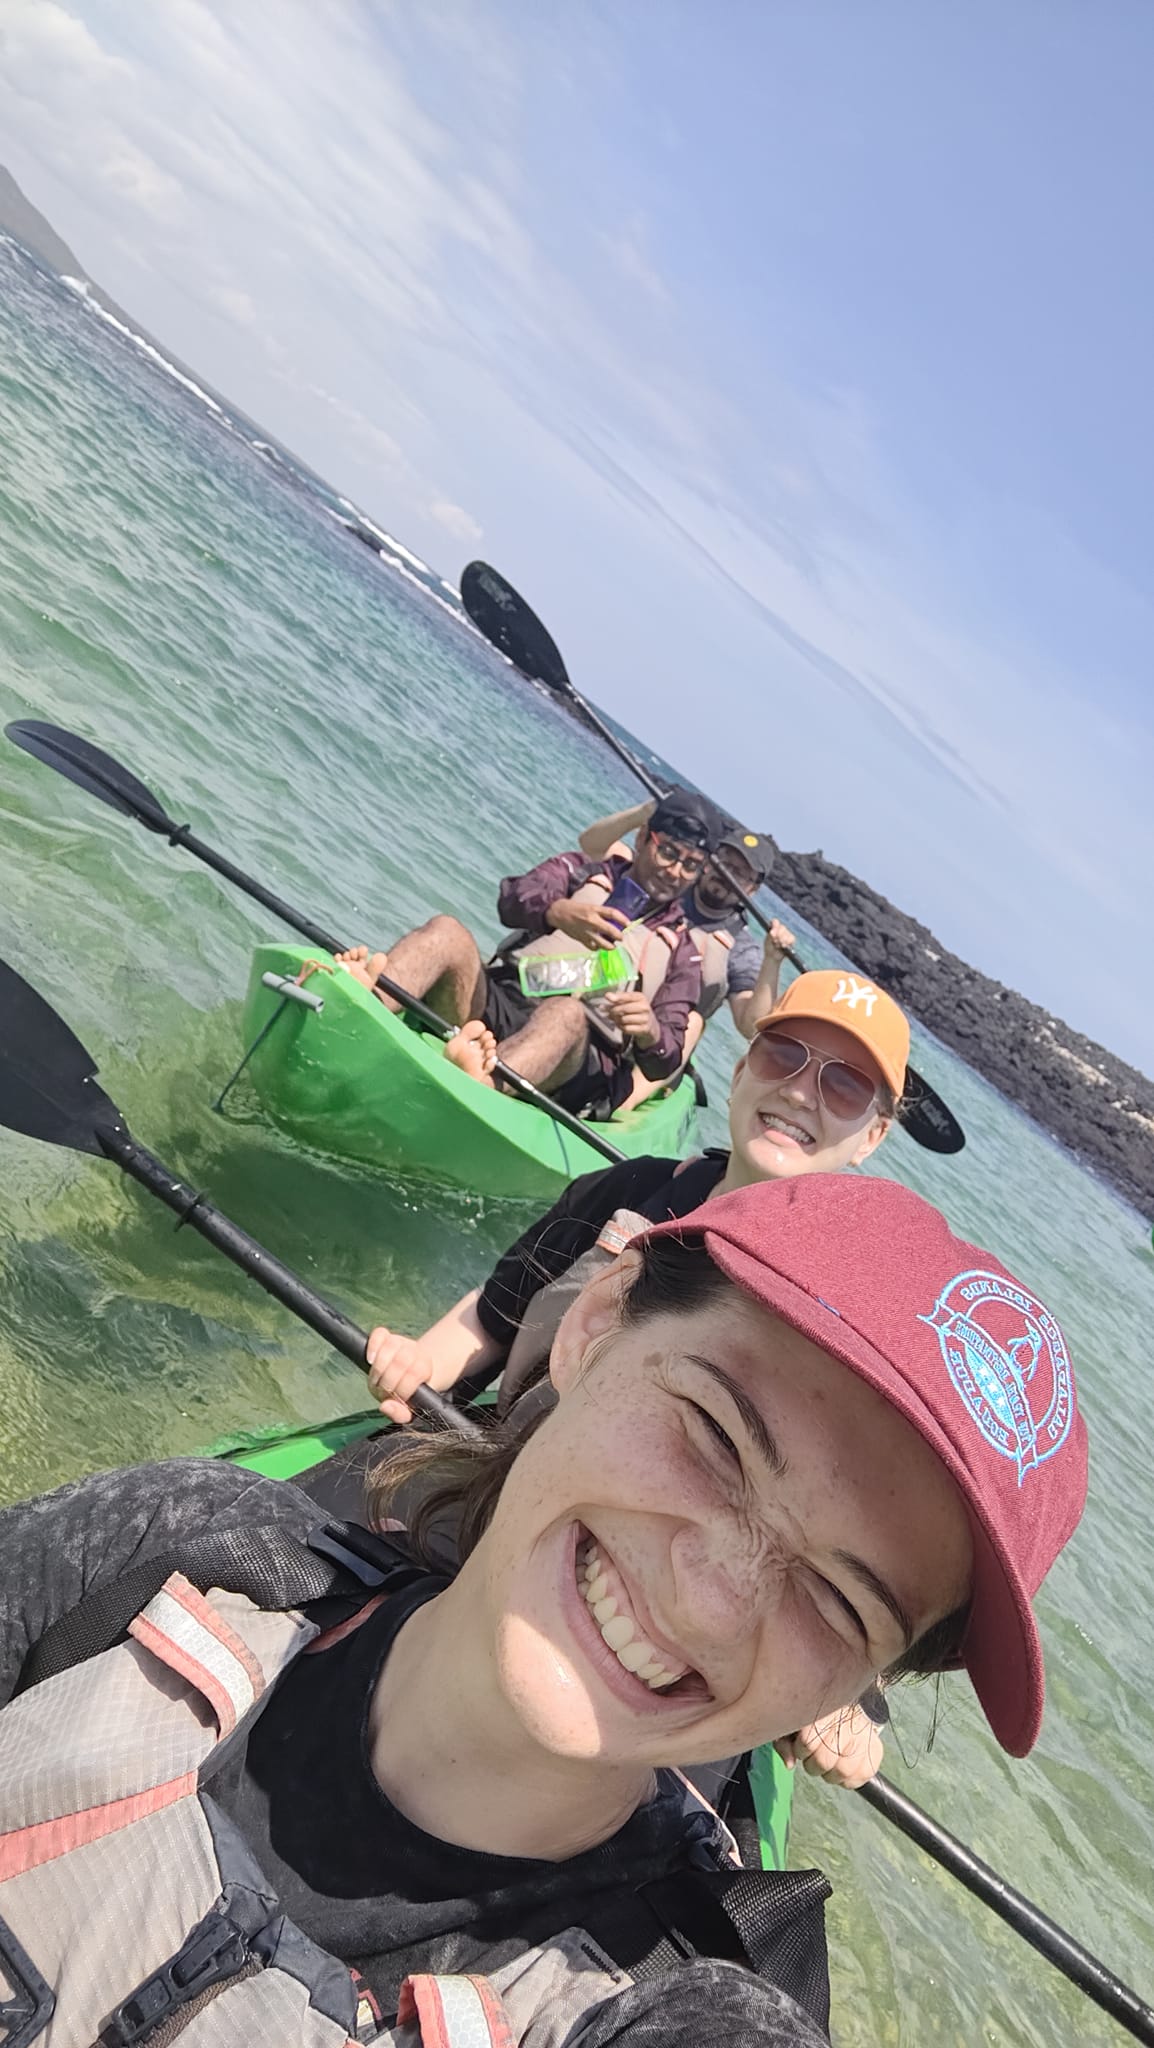 Pictured is Leena and I in a kayak. We are taking a selfie while out in the Pacific Ocean.